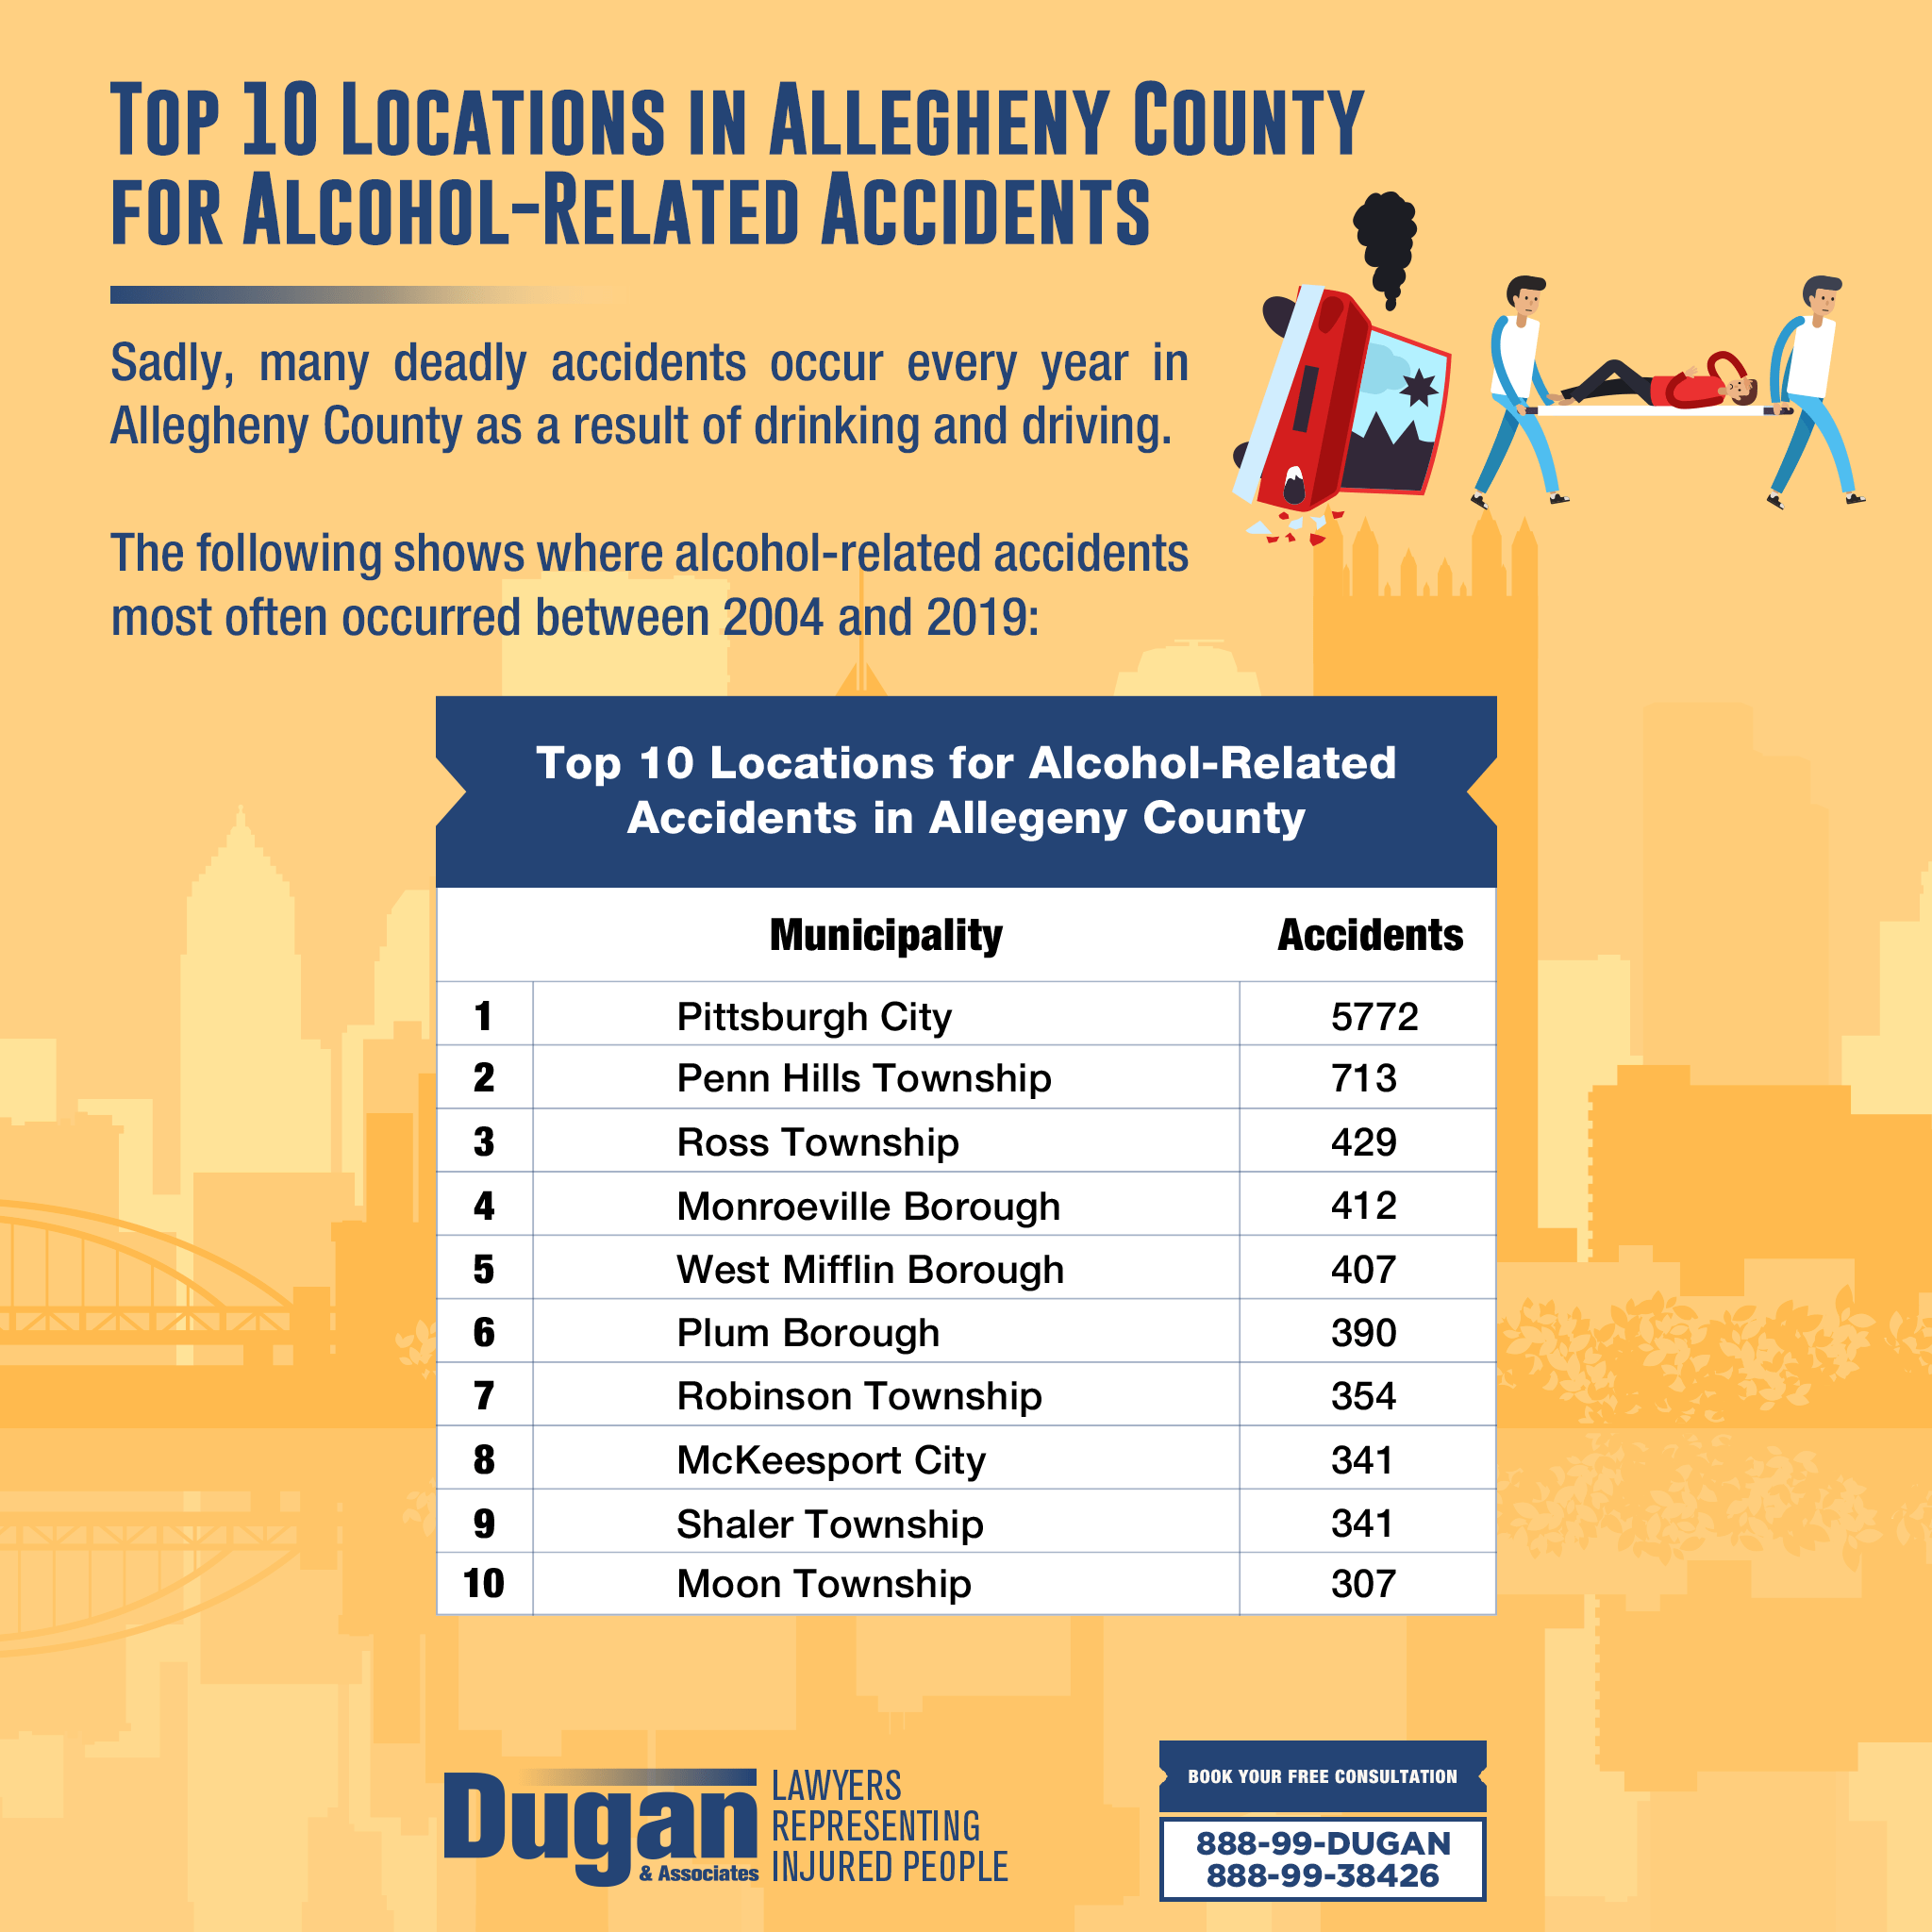 Alcohol-Related Accidents in Allegheny County